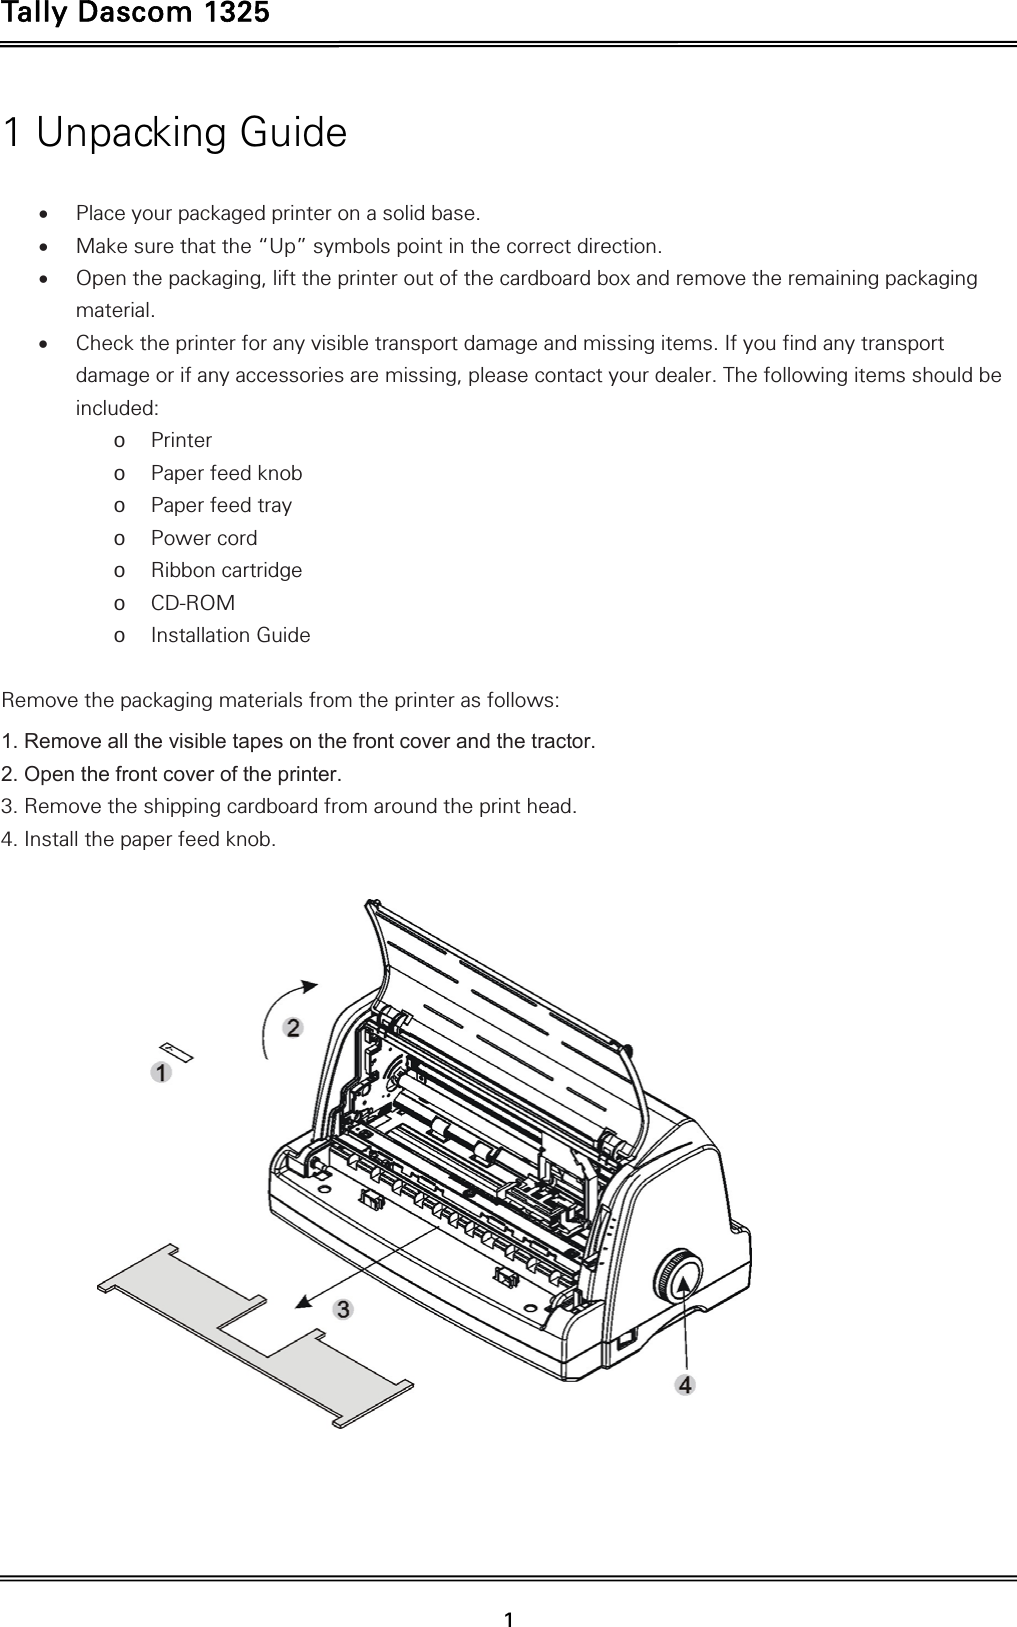 Tally Dascom 1325   1  1 Unpacking Guide   Place your packaged printer on a solid base.  Make sure that the “Up” symbols point in the correct direction.  Open the packaging, lift the printer out of the cardboard box and remove the remaining packaging material.  Check the printer for any visible transport damage and missing items. If you find any transport damage or if any accessories are missing, please contact your dealer. The following items should be included: o Printer o Paper feed knob o Paper feed tray o Power cord o Ribbon cartridge o CD-ROM o Installation Guide  Remove the packaging materials from the printer as follows: 1. Remove all the visible tapes on the front cover and the tractor. 2. Open the front cover of the printer. 3. Remove the shipping cardboard from around the print head. 4. Install the paper feed knob.     